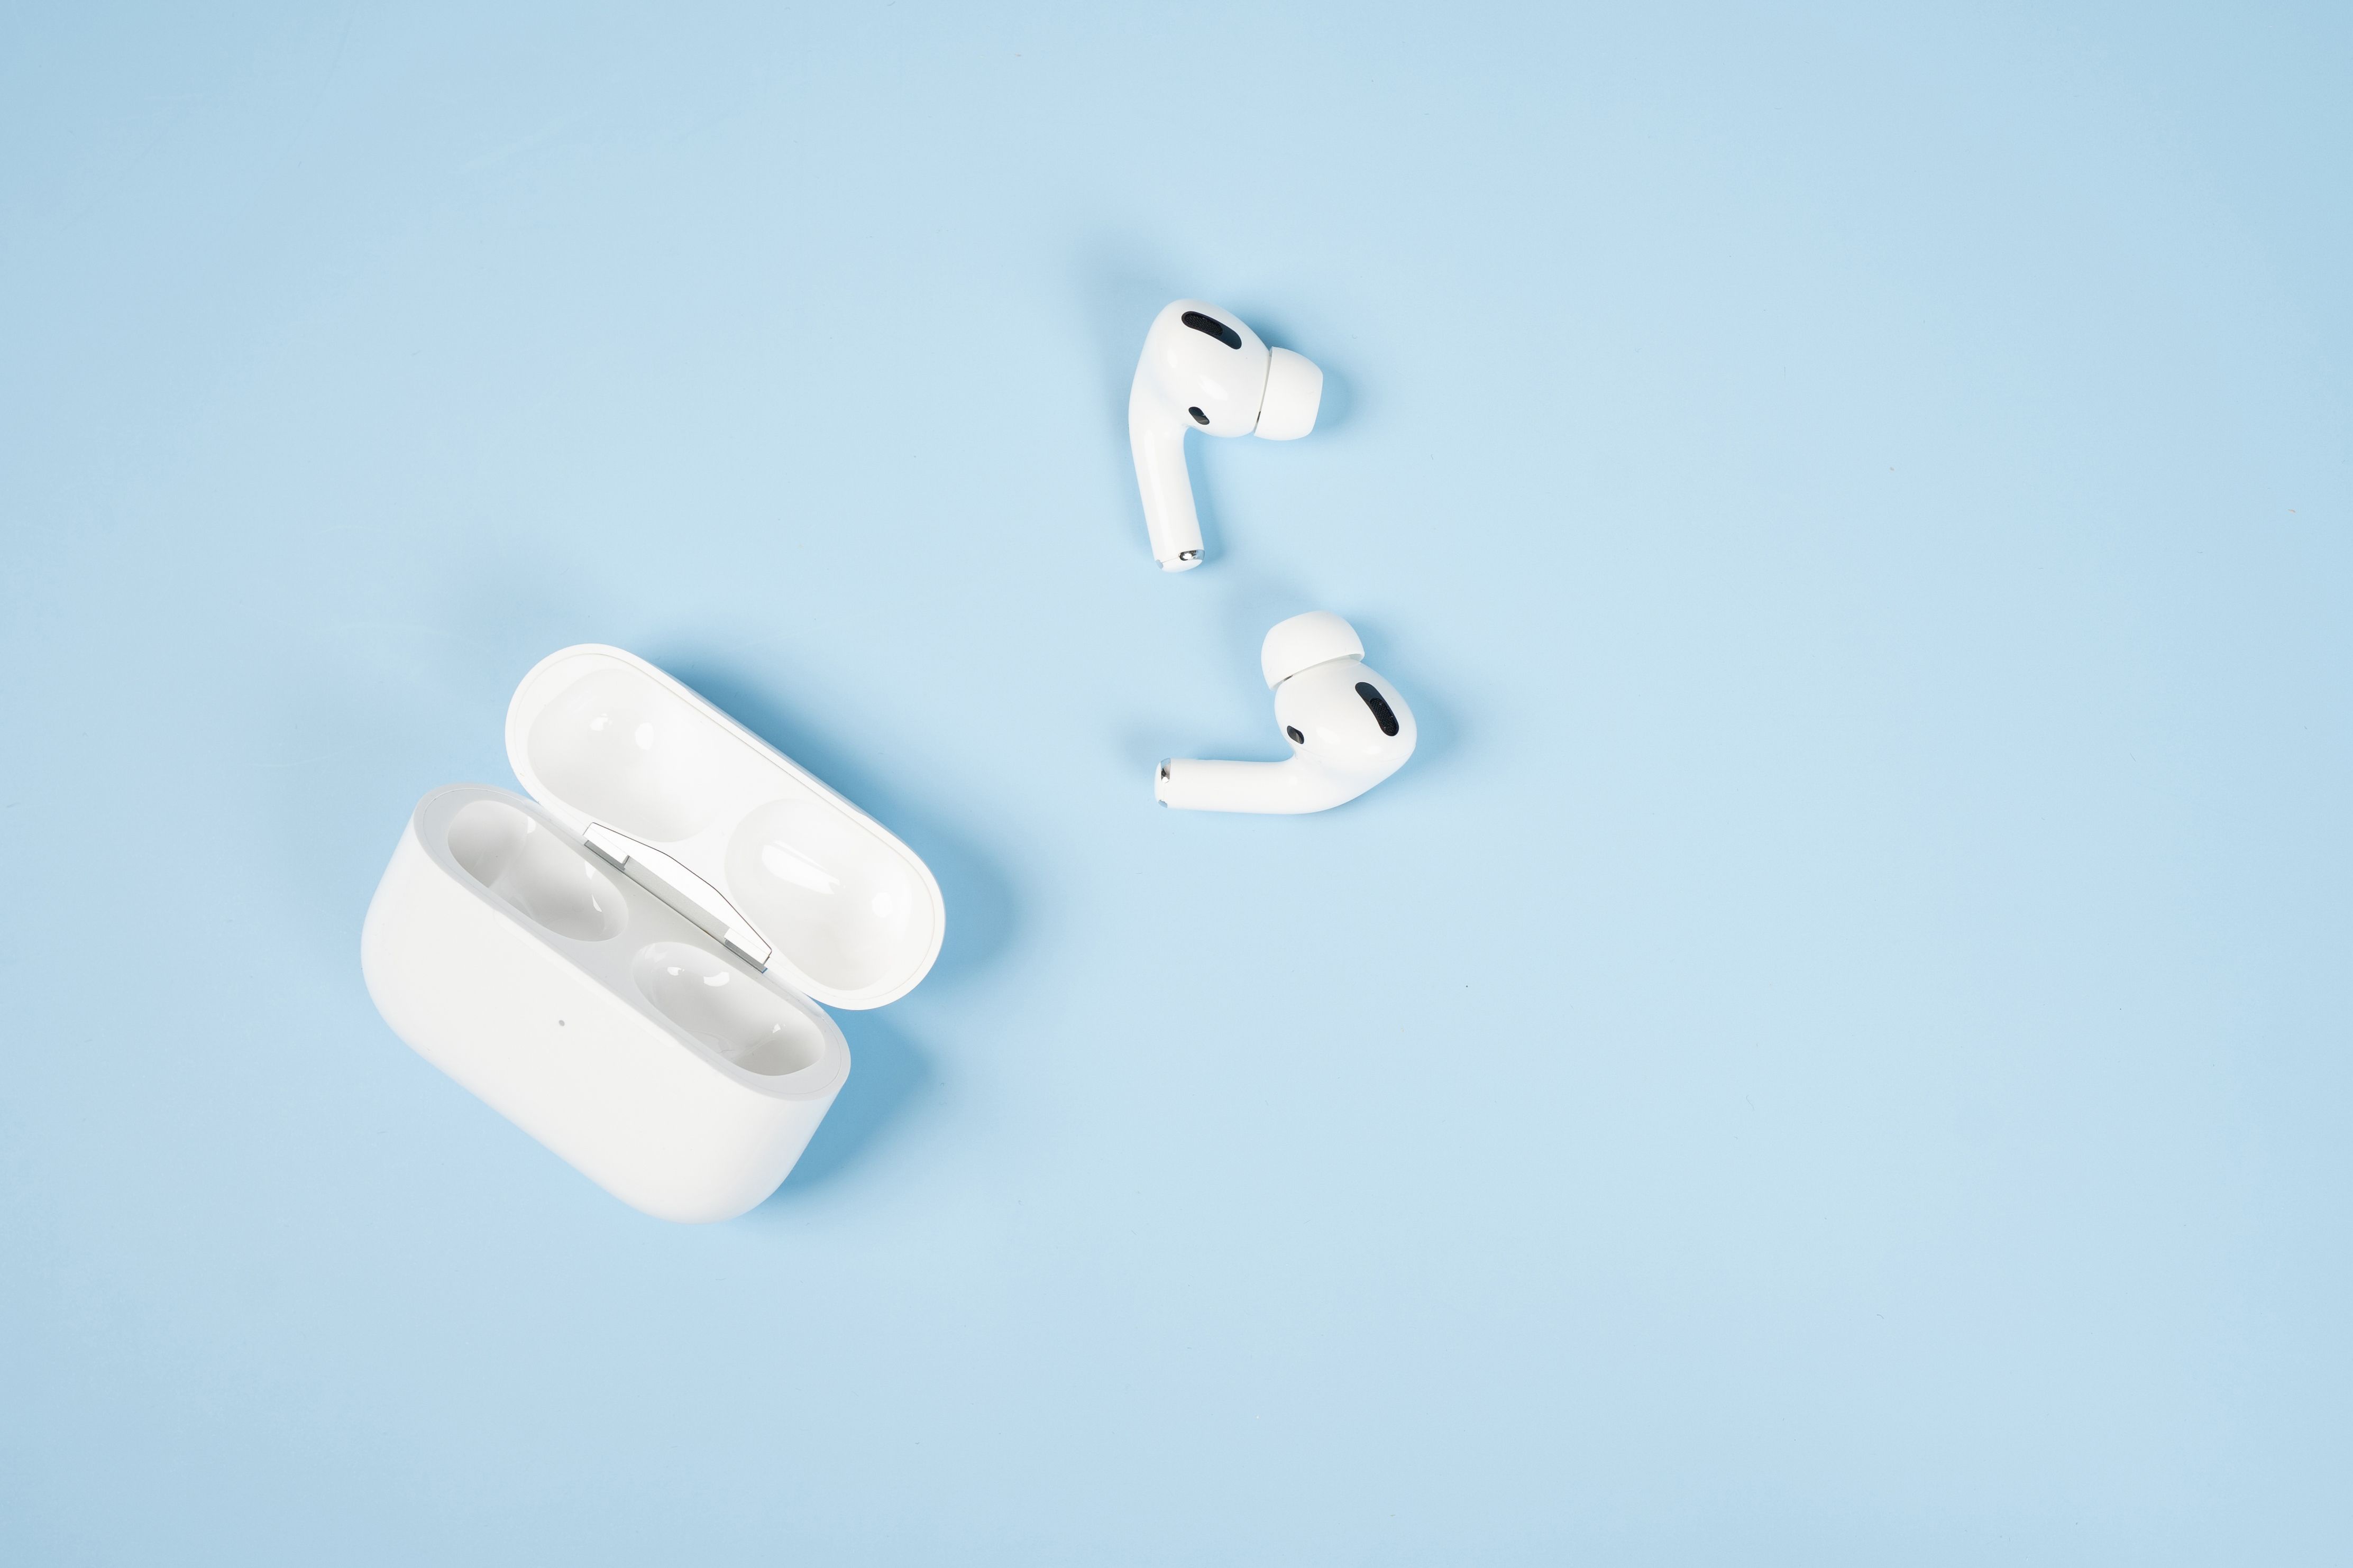 Black Friday AirPods AirPods Sale on Amazon As Low as $79